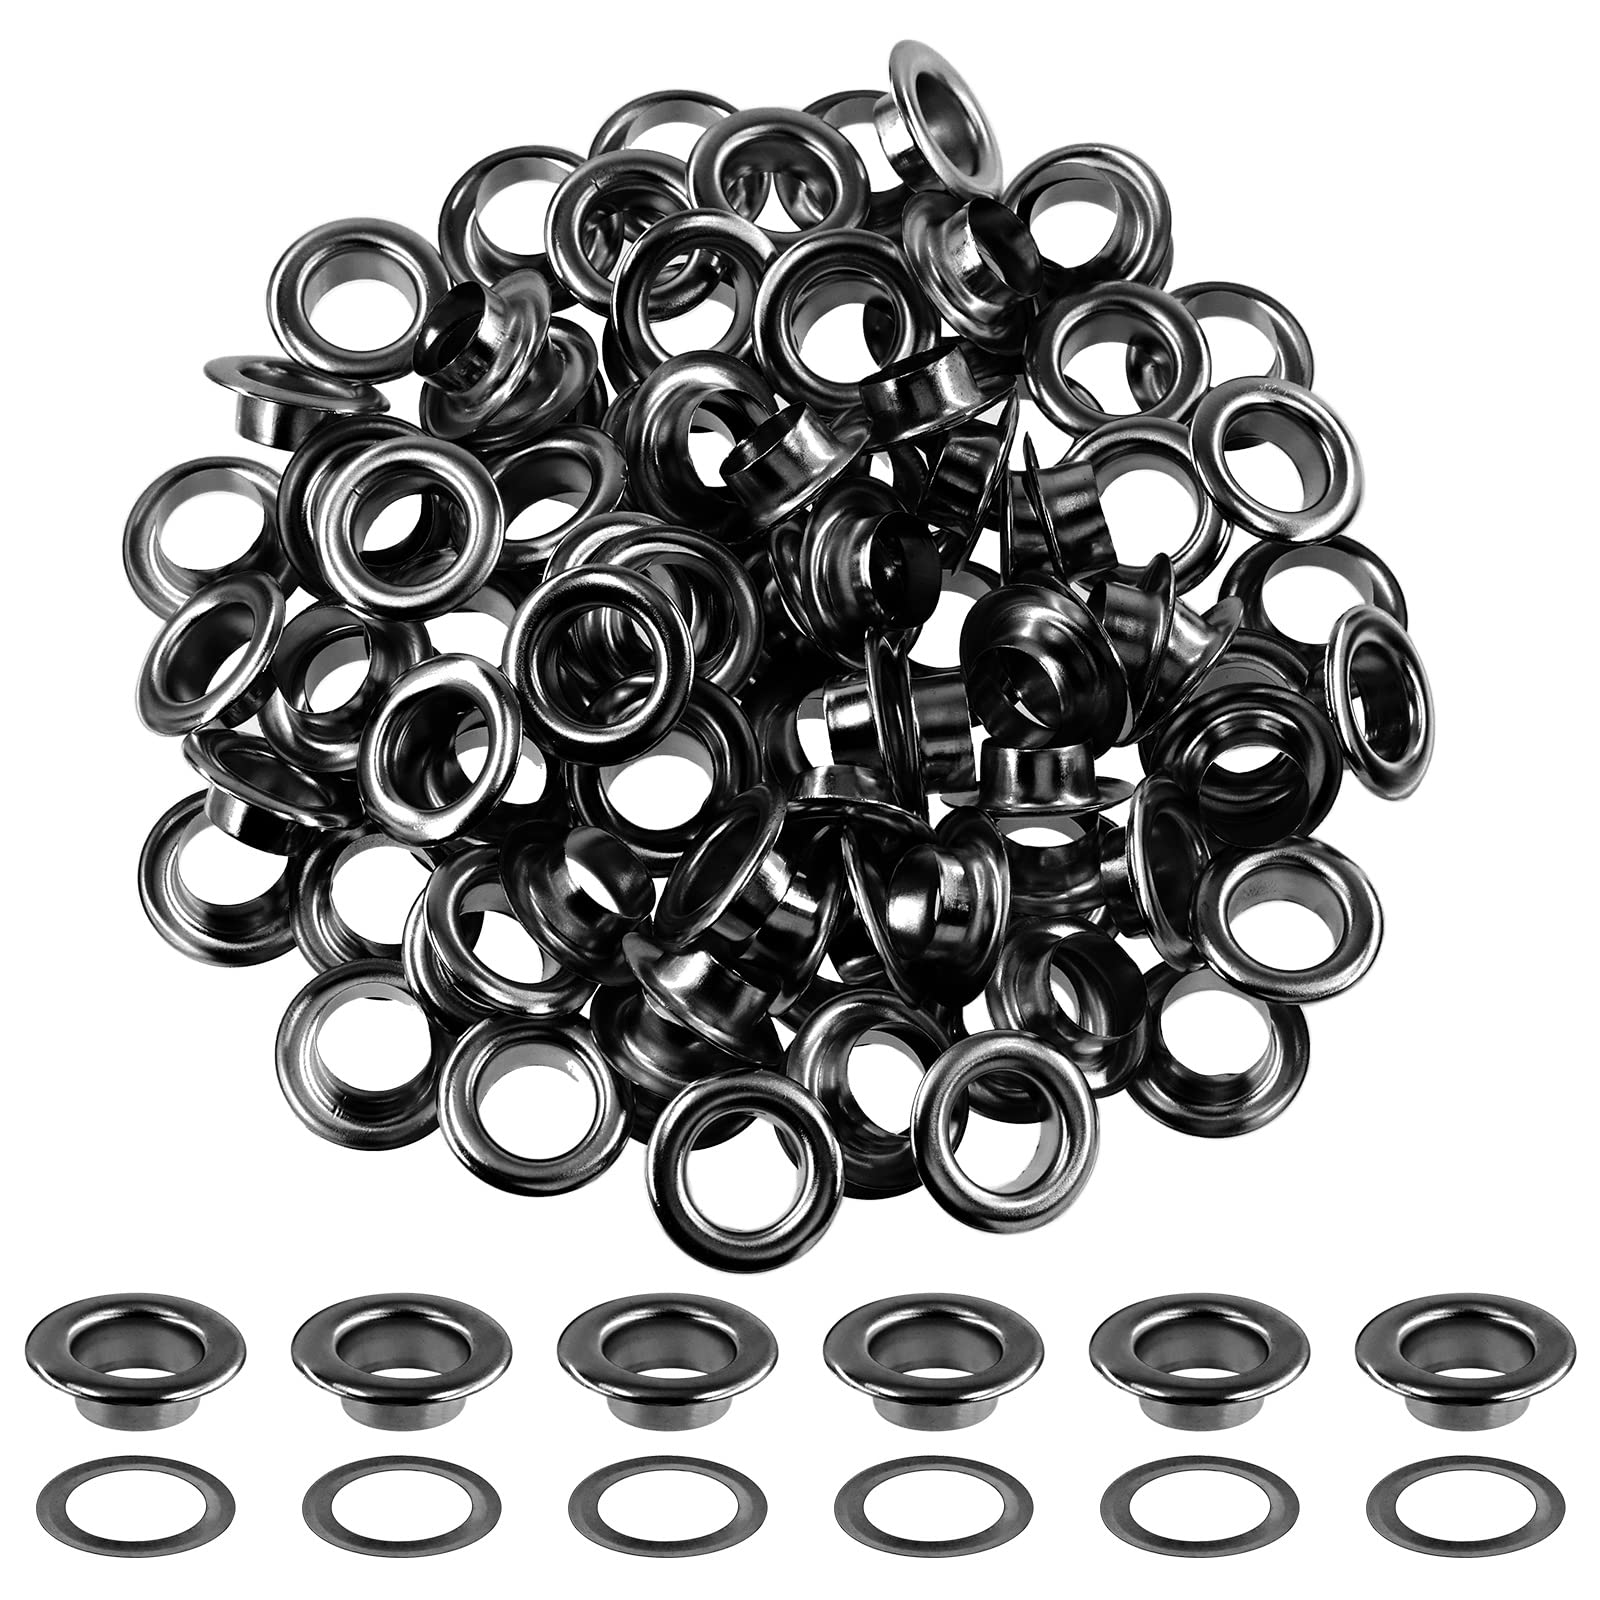 Hilitchi 40Pcs 1 Inch - 25mm Gun-Black Thicken Grommet Eyelets Metal  Eyelets with Washers Assortment Kit, Hole Self Backing Eyelet for Bead  Cores